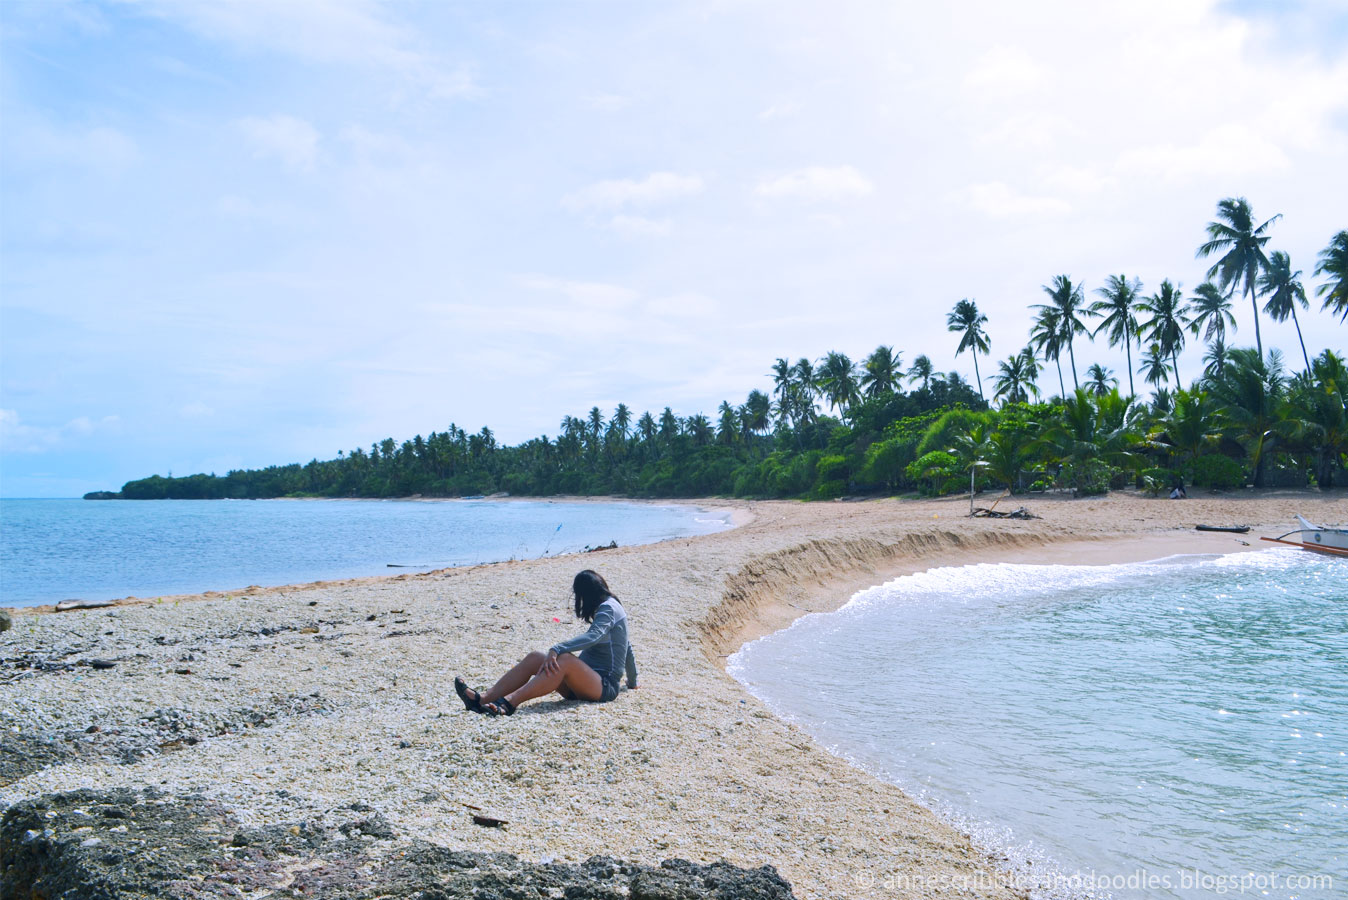 Travel Diary: Binucot Beach, Romblon Philippines | Anne's Scribbles and Doodles